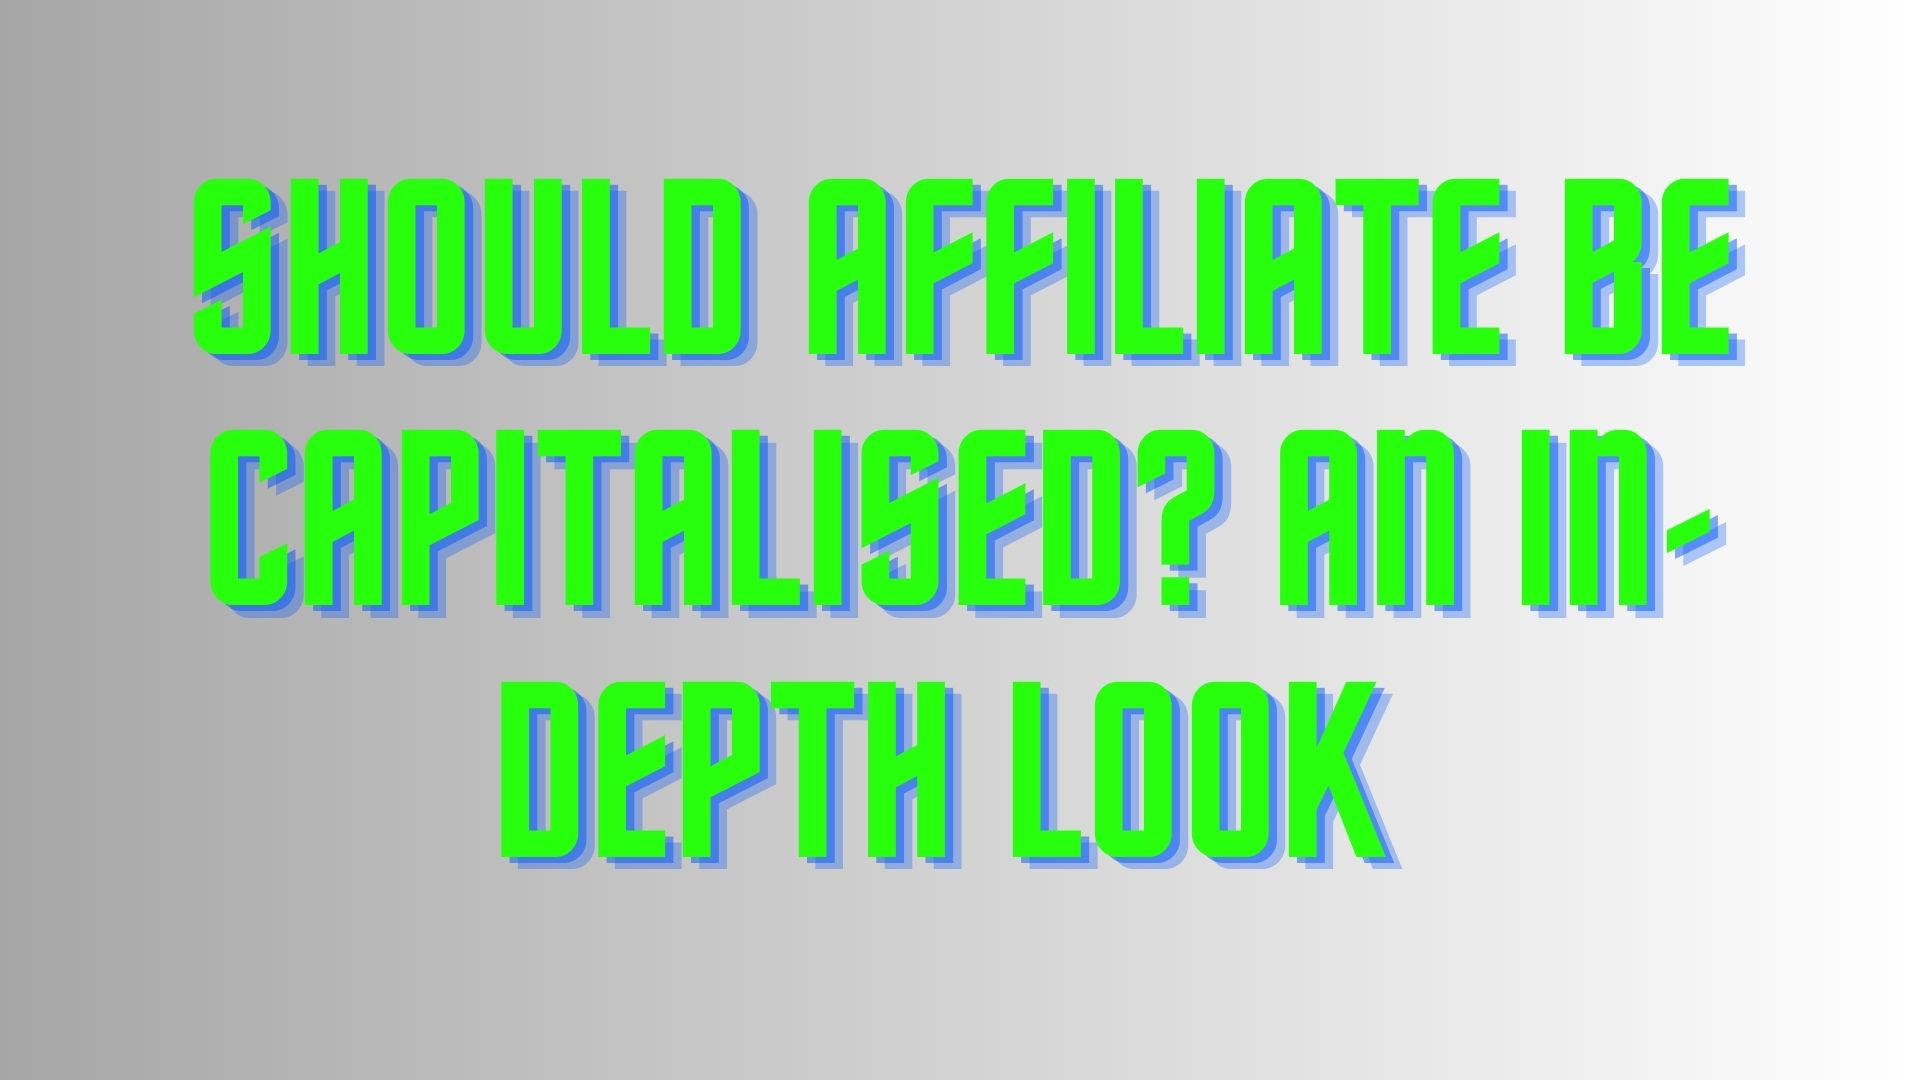 Should Affiliate Be Capitalised? An In-Depth Look